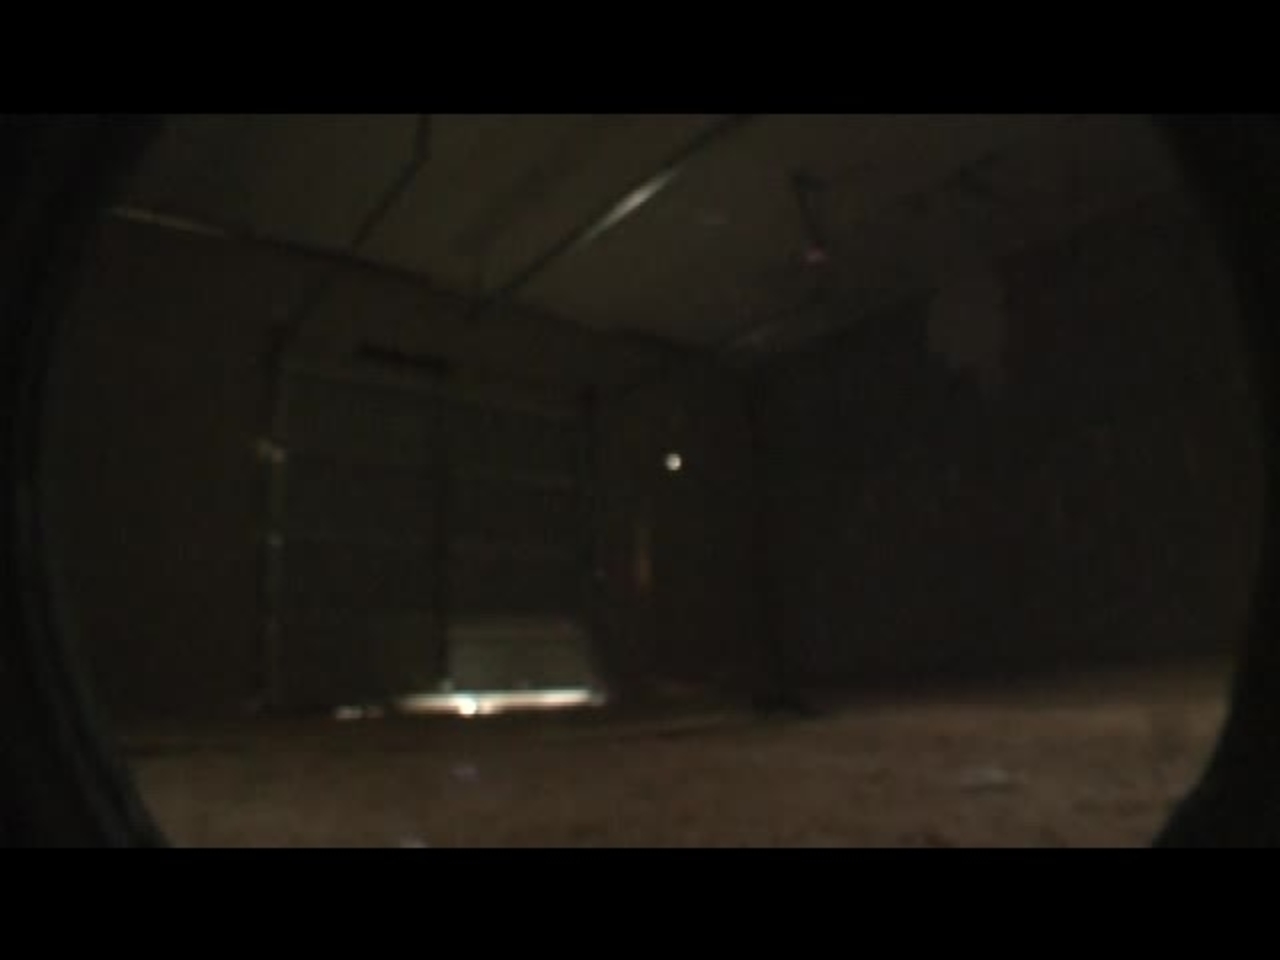 Test 1: Dispersion and Burning Behavior of Hydrogen Released in a Full-Scale Residential Garage in the Presence and Absence of Conventional Automobiles (View of garage interior from floor camera)